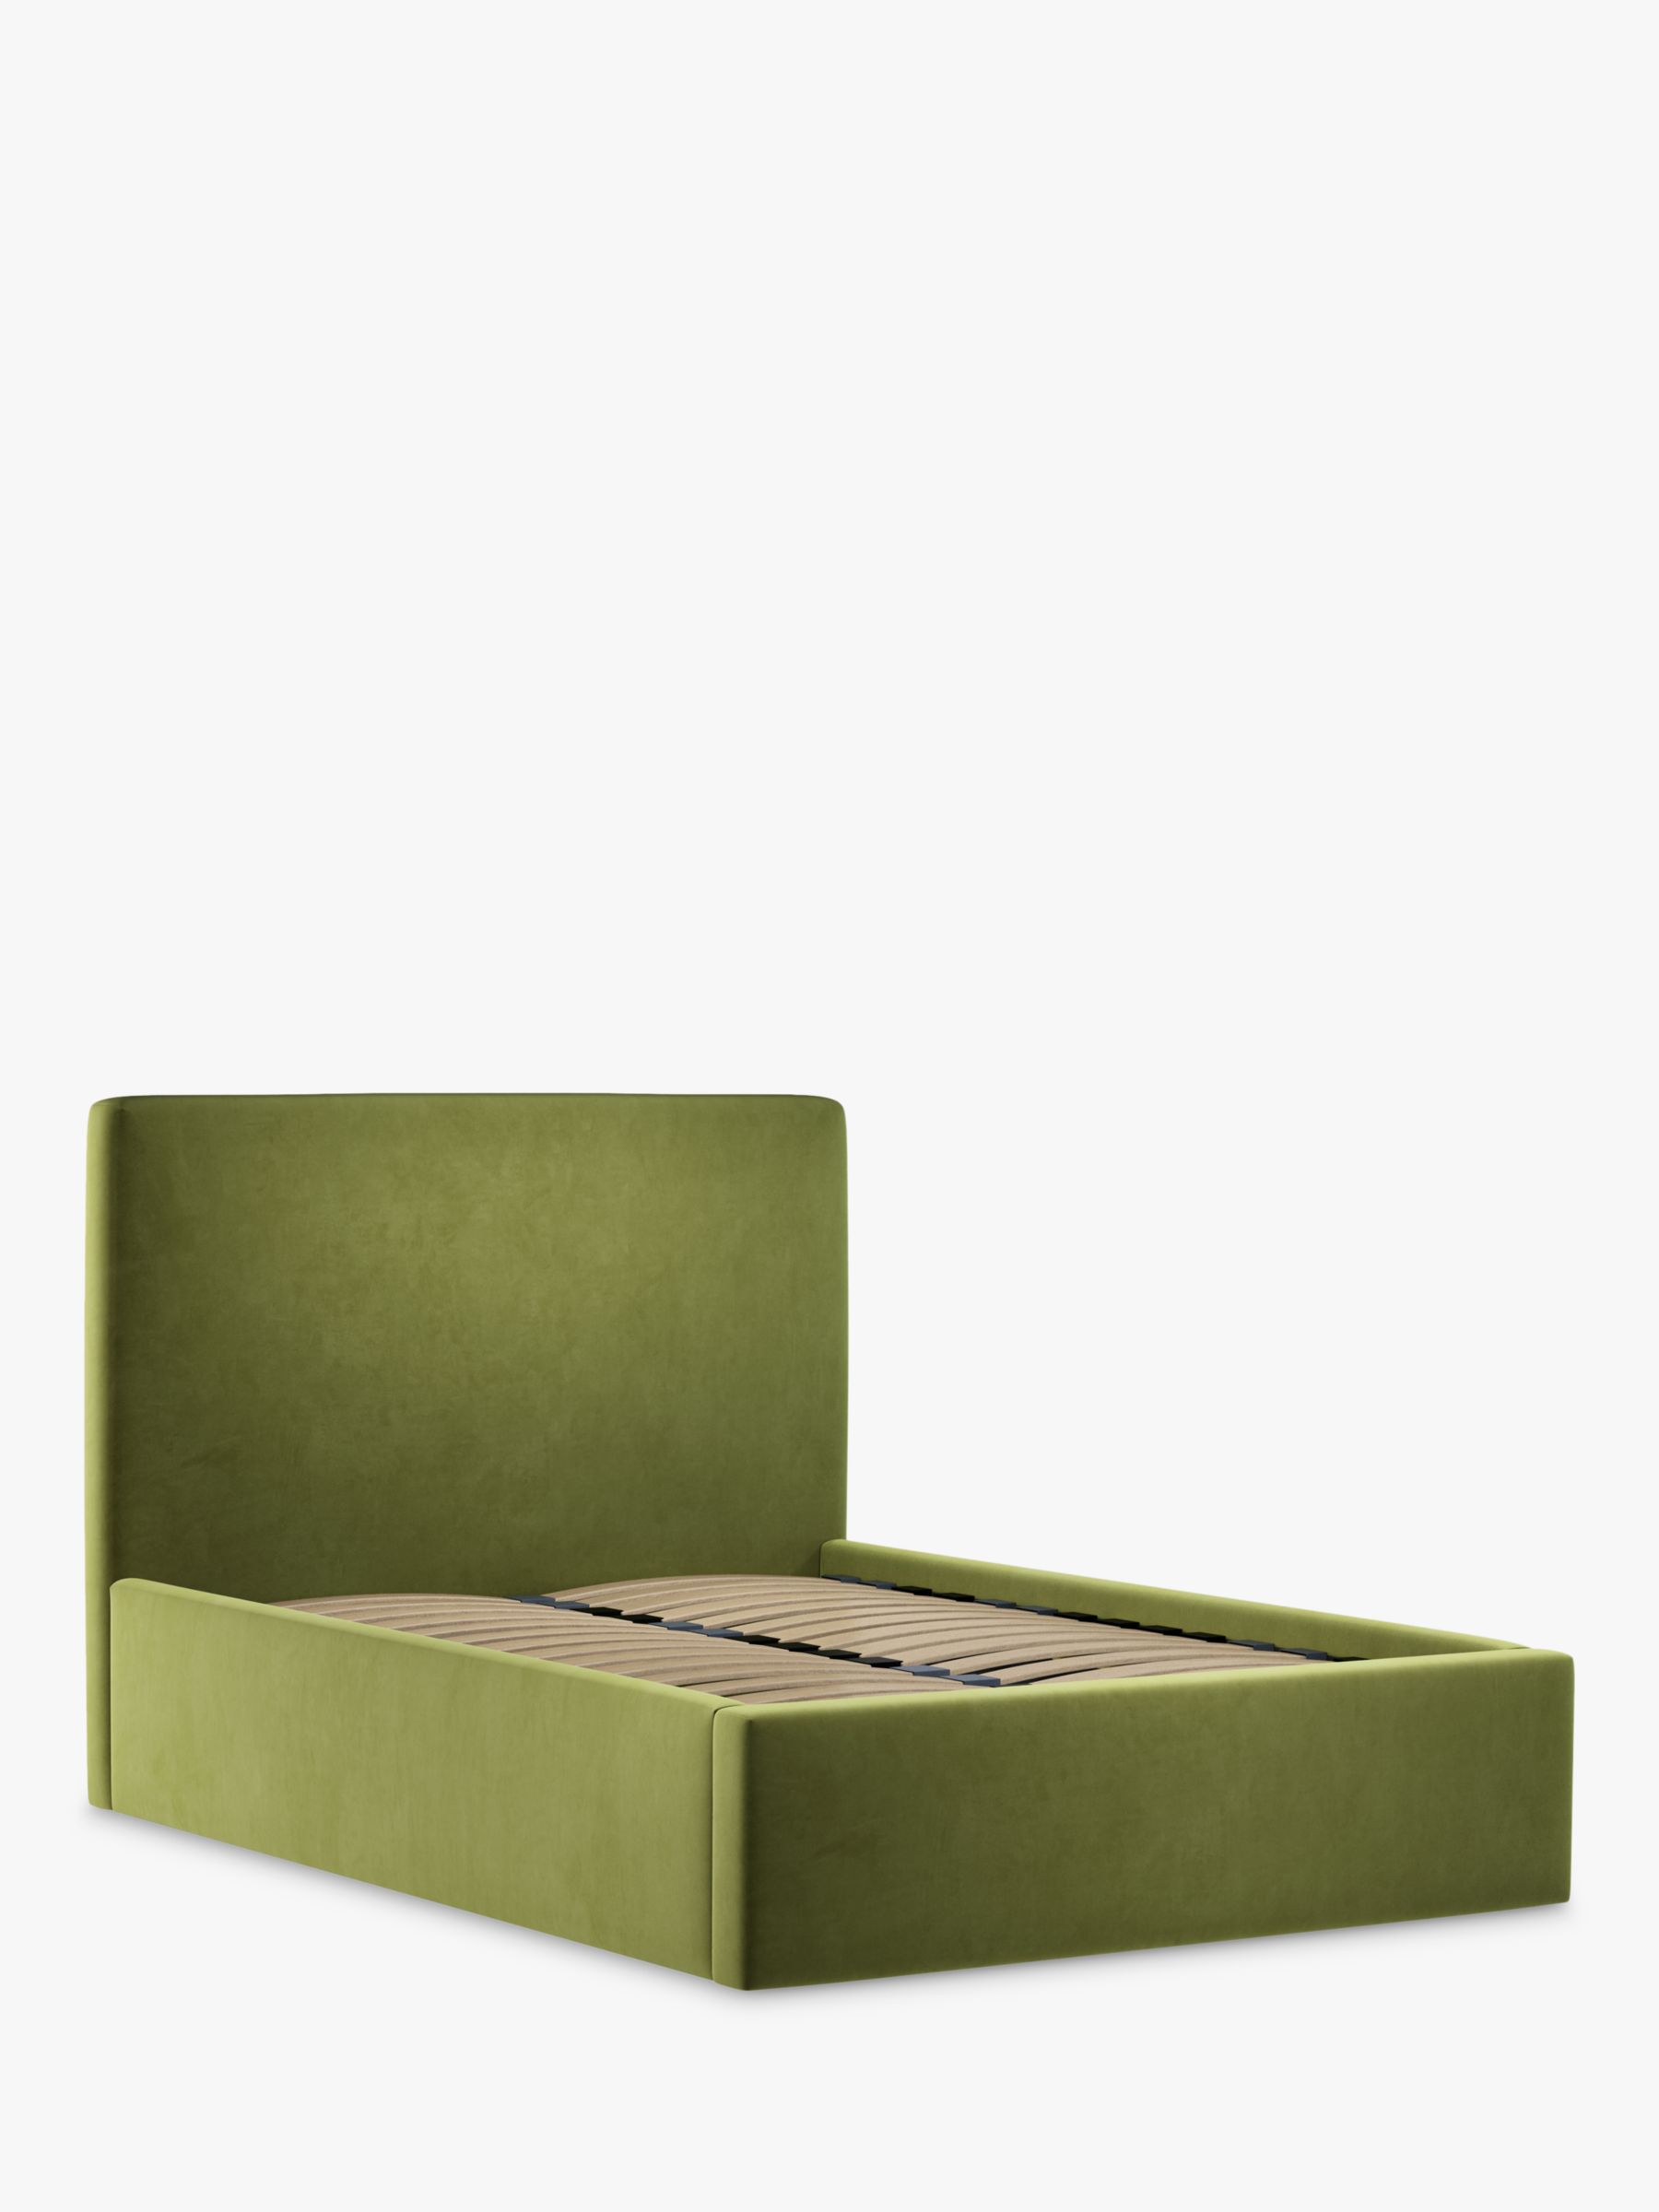 Photo of John lewis emily ottoman storage upholstered bed frame double